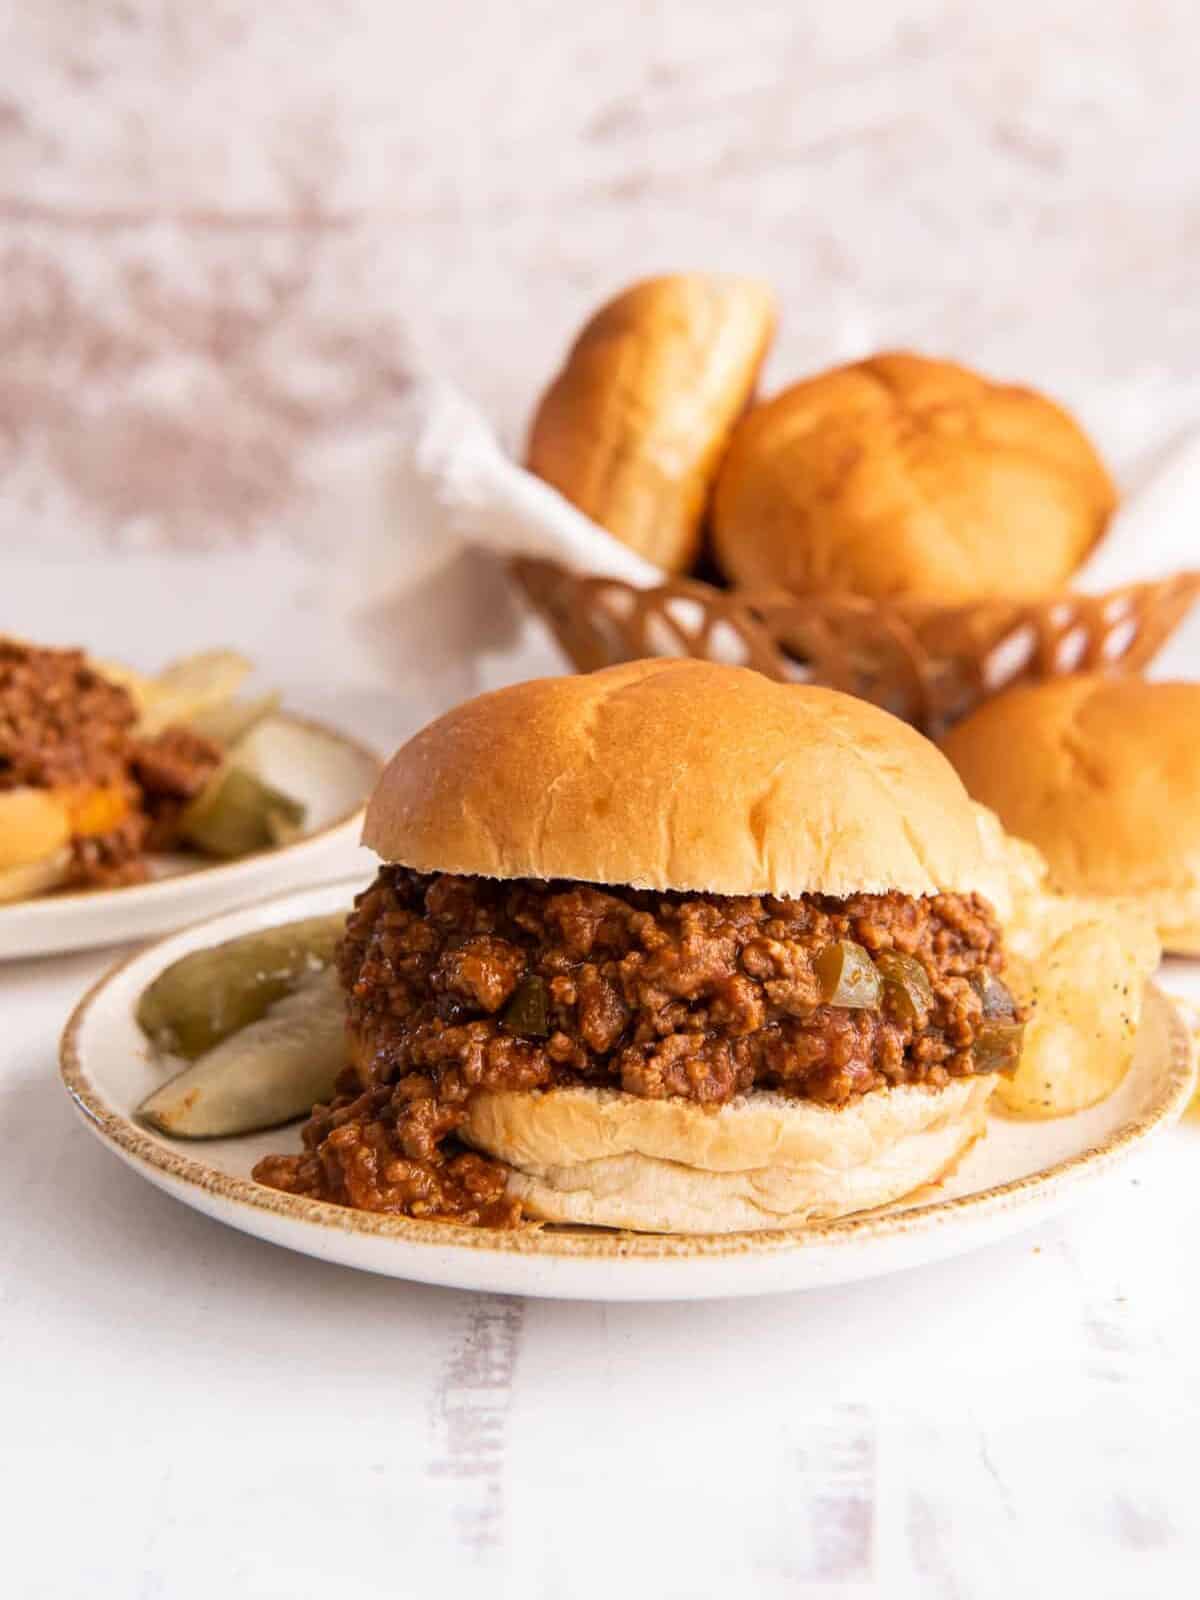 sloppy joe sandwich on a plate with chips and a pickle.